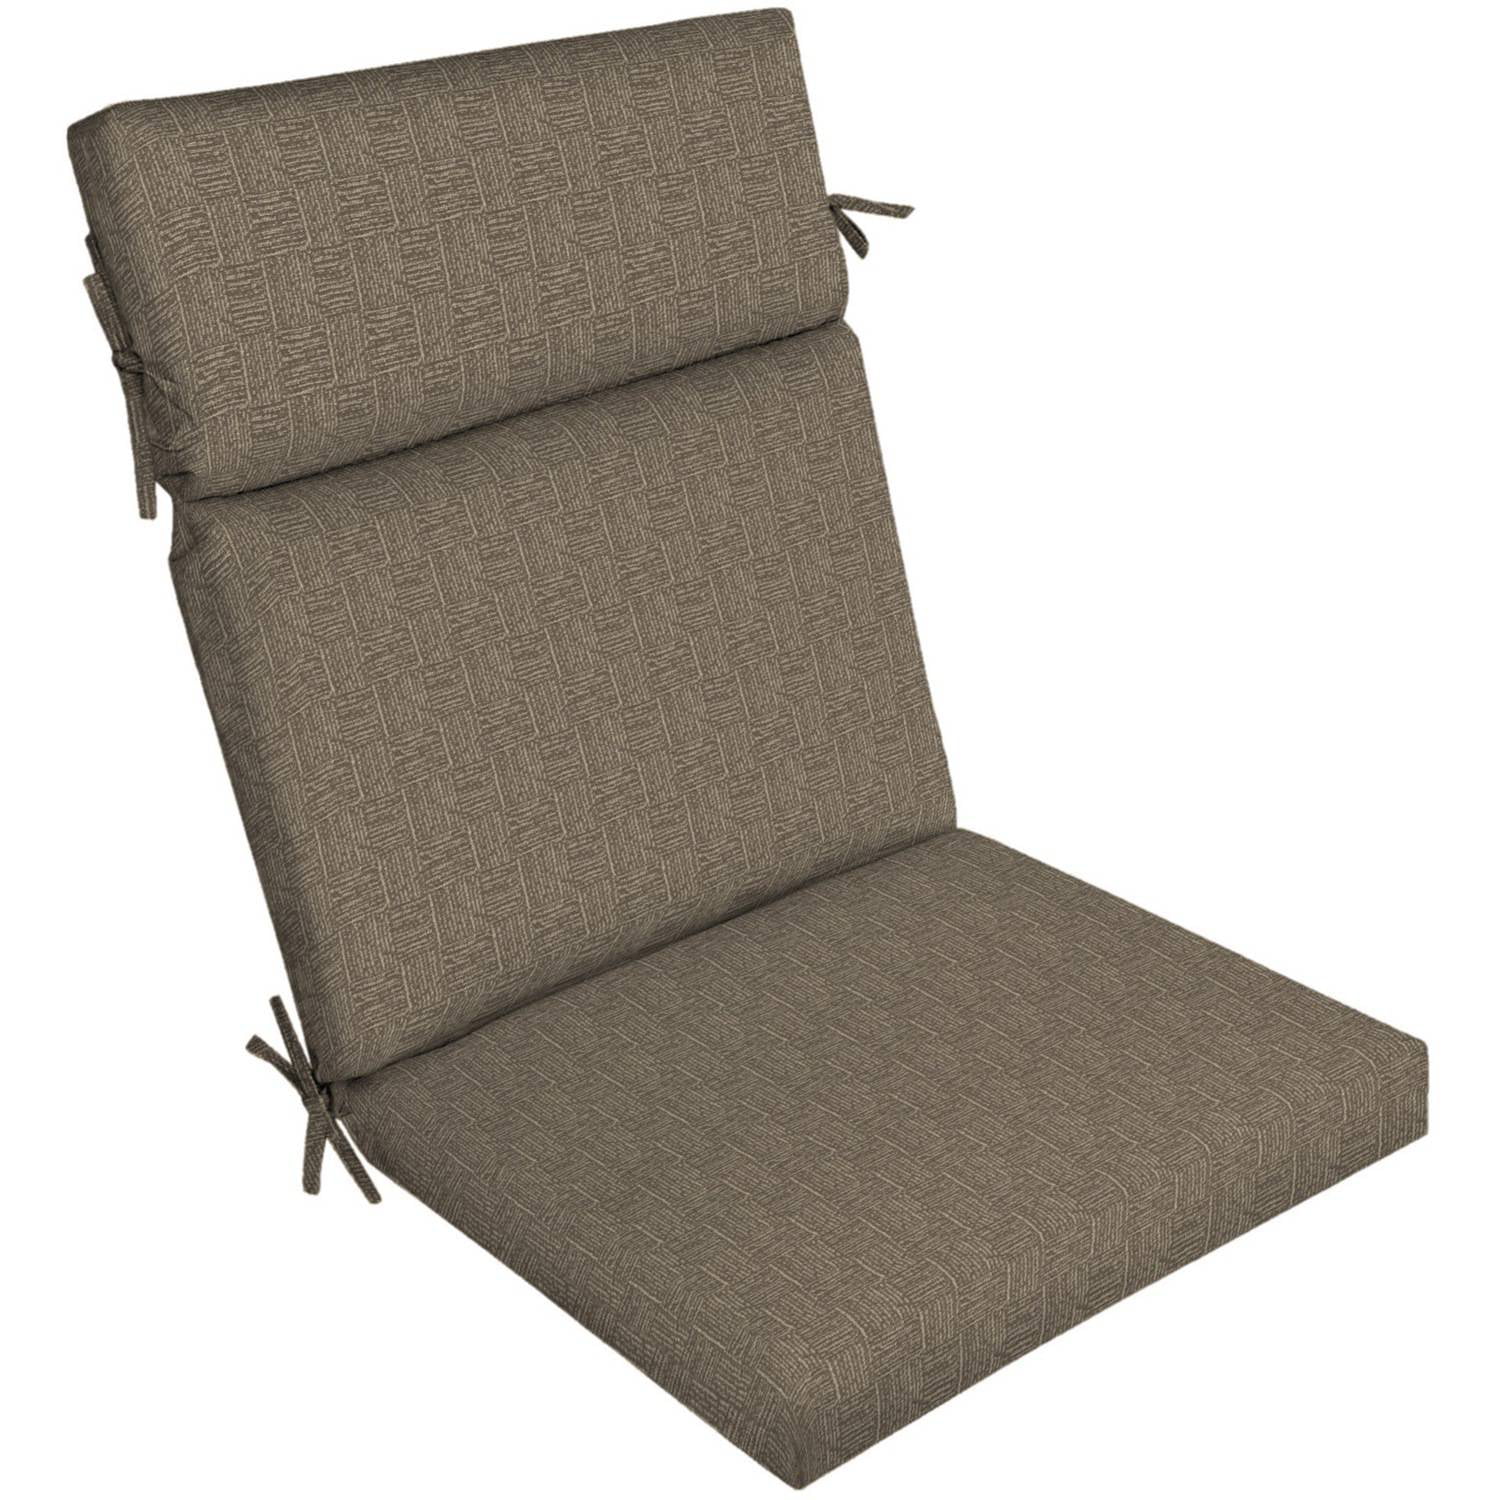 Arden Outdoors Dining Chair Cushion, Brown Woven, 44"L x 21"W x 4.5"H